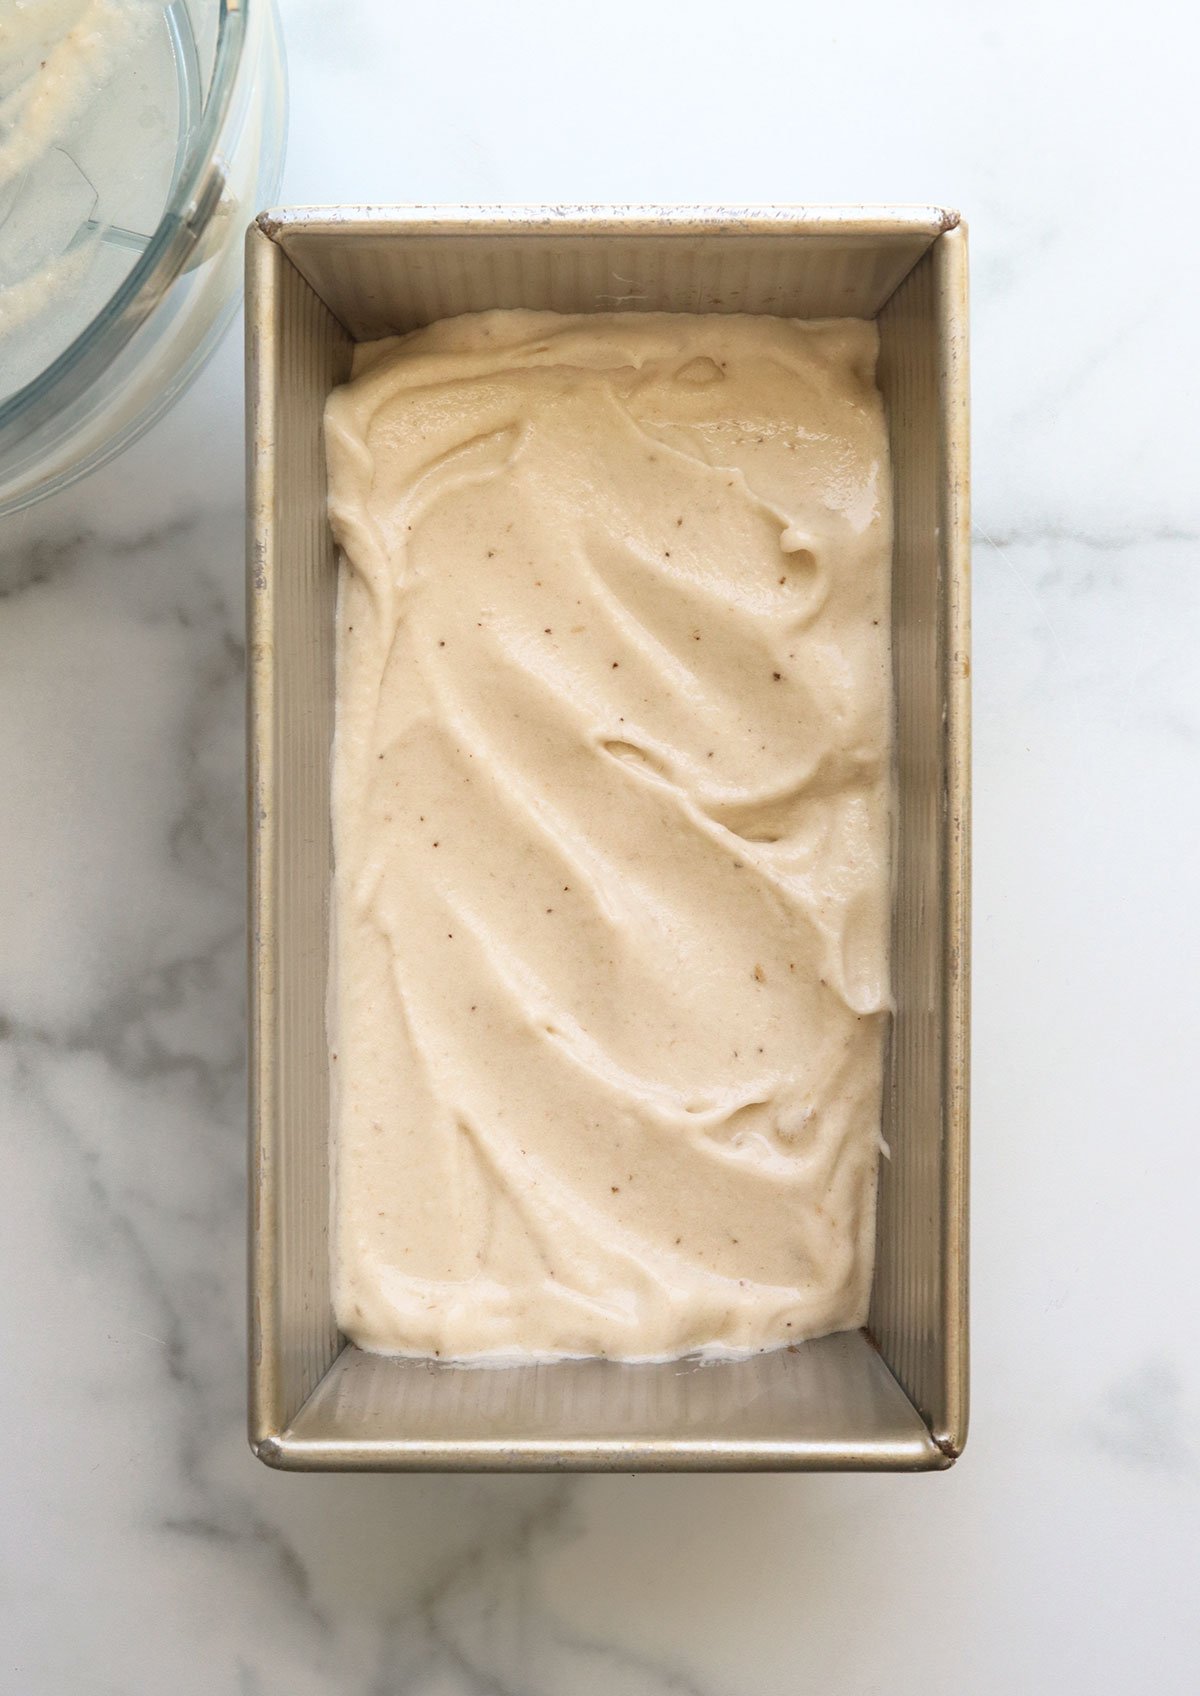 banana ice cream spread into a loaf pan for freezing.